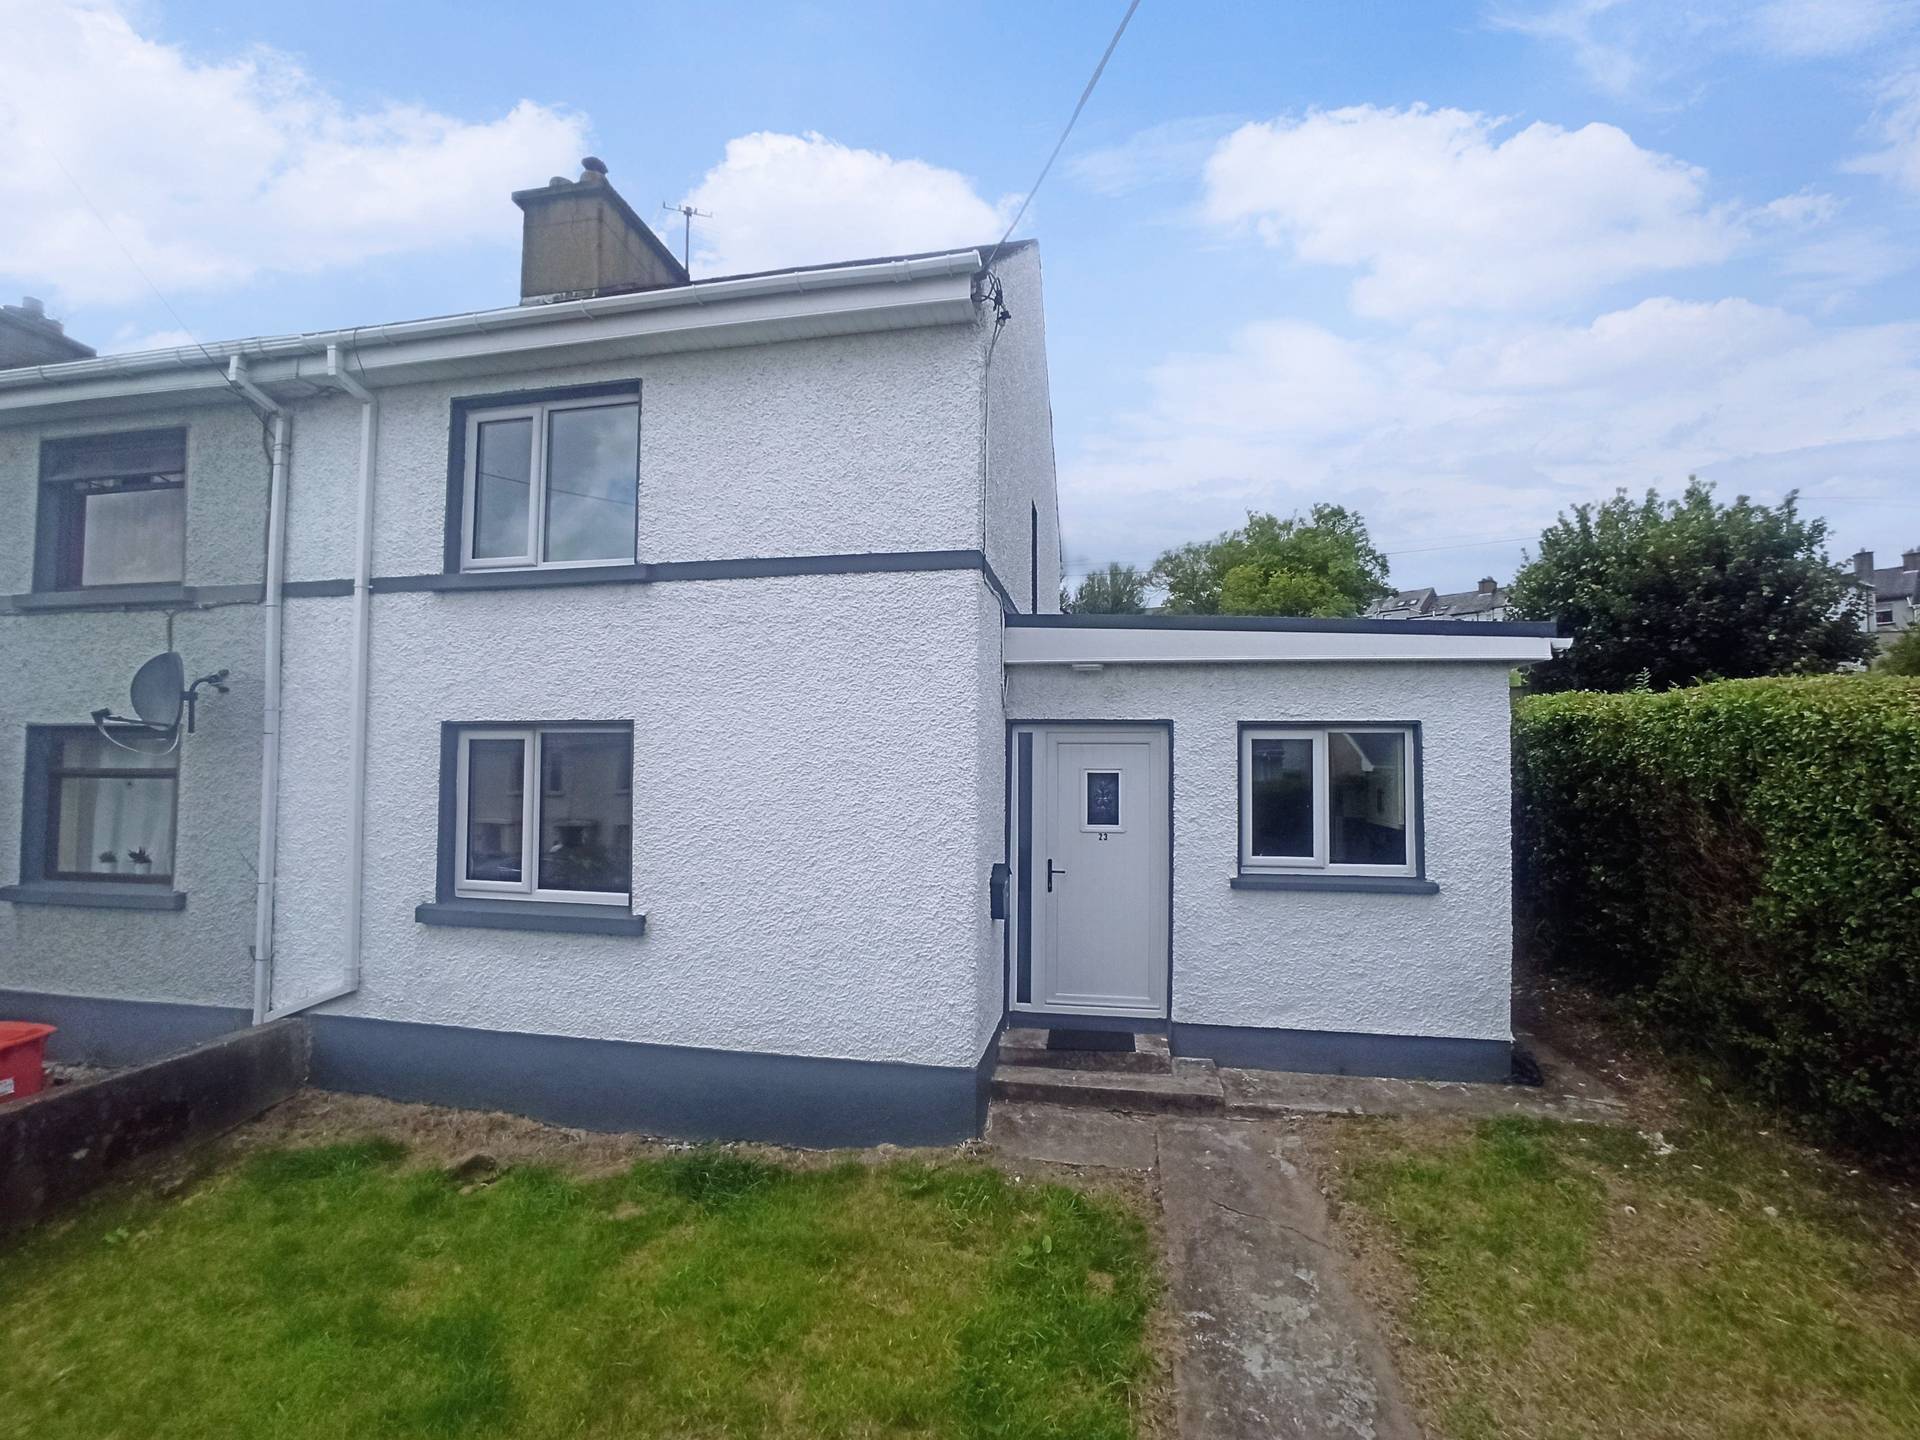 23 Ard O’Donnell, Letterkenny, Co. Donegal, F92 V8DW